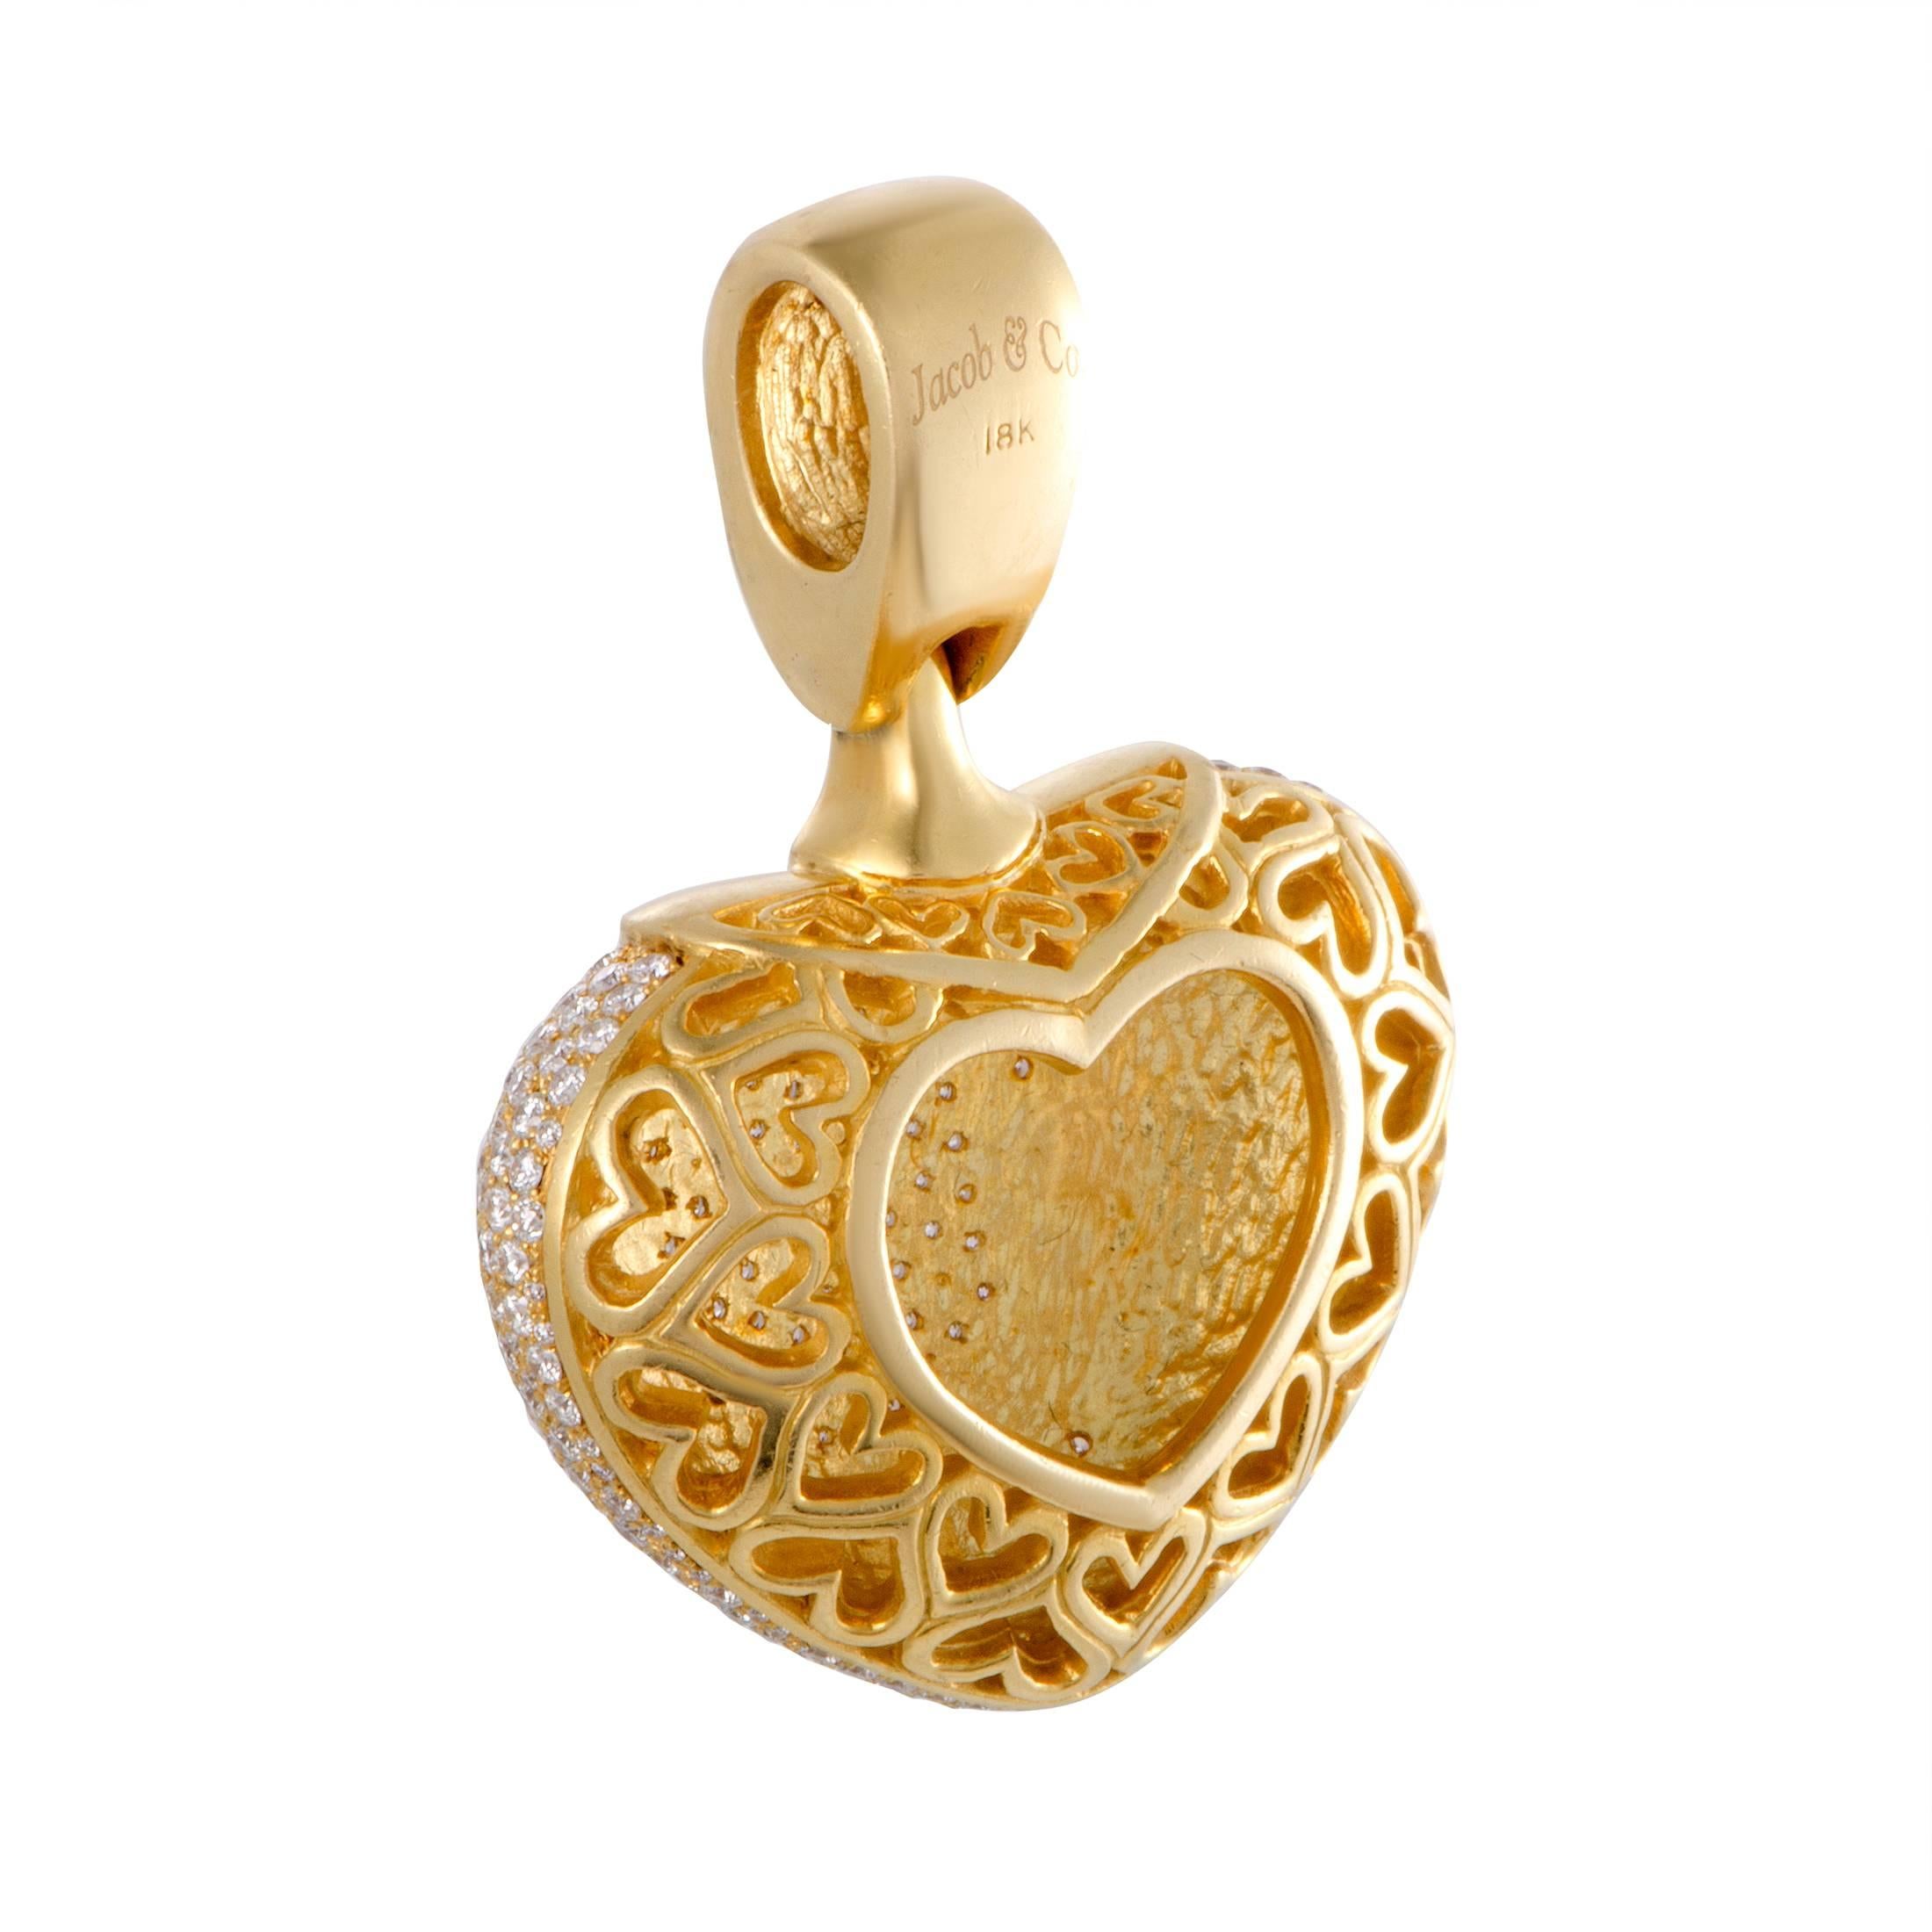 An embodiment of luxury in its most dazzling form, this stunning Jacob & Co. pendant features an exceptionally feminine design and fabulous diamond décor. The pendant is expertly crafted from classy 18K yellow gold and set with a plethora of nearly